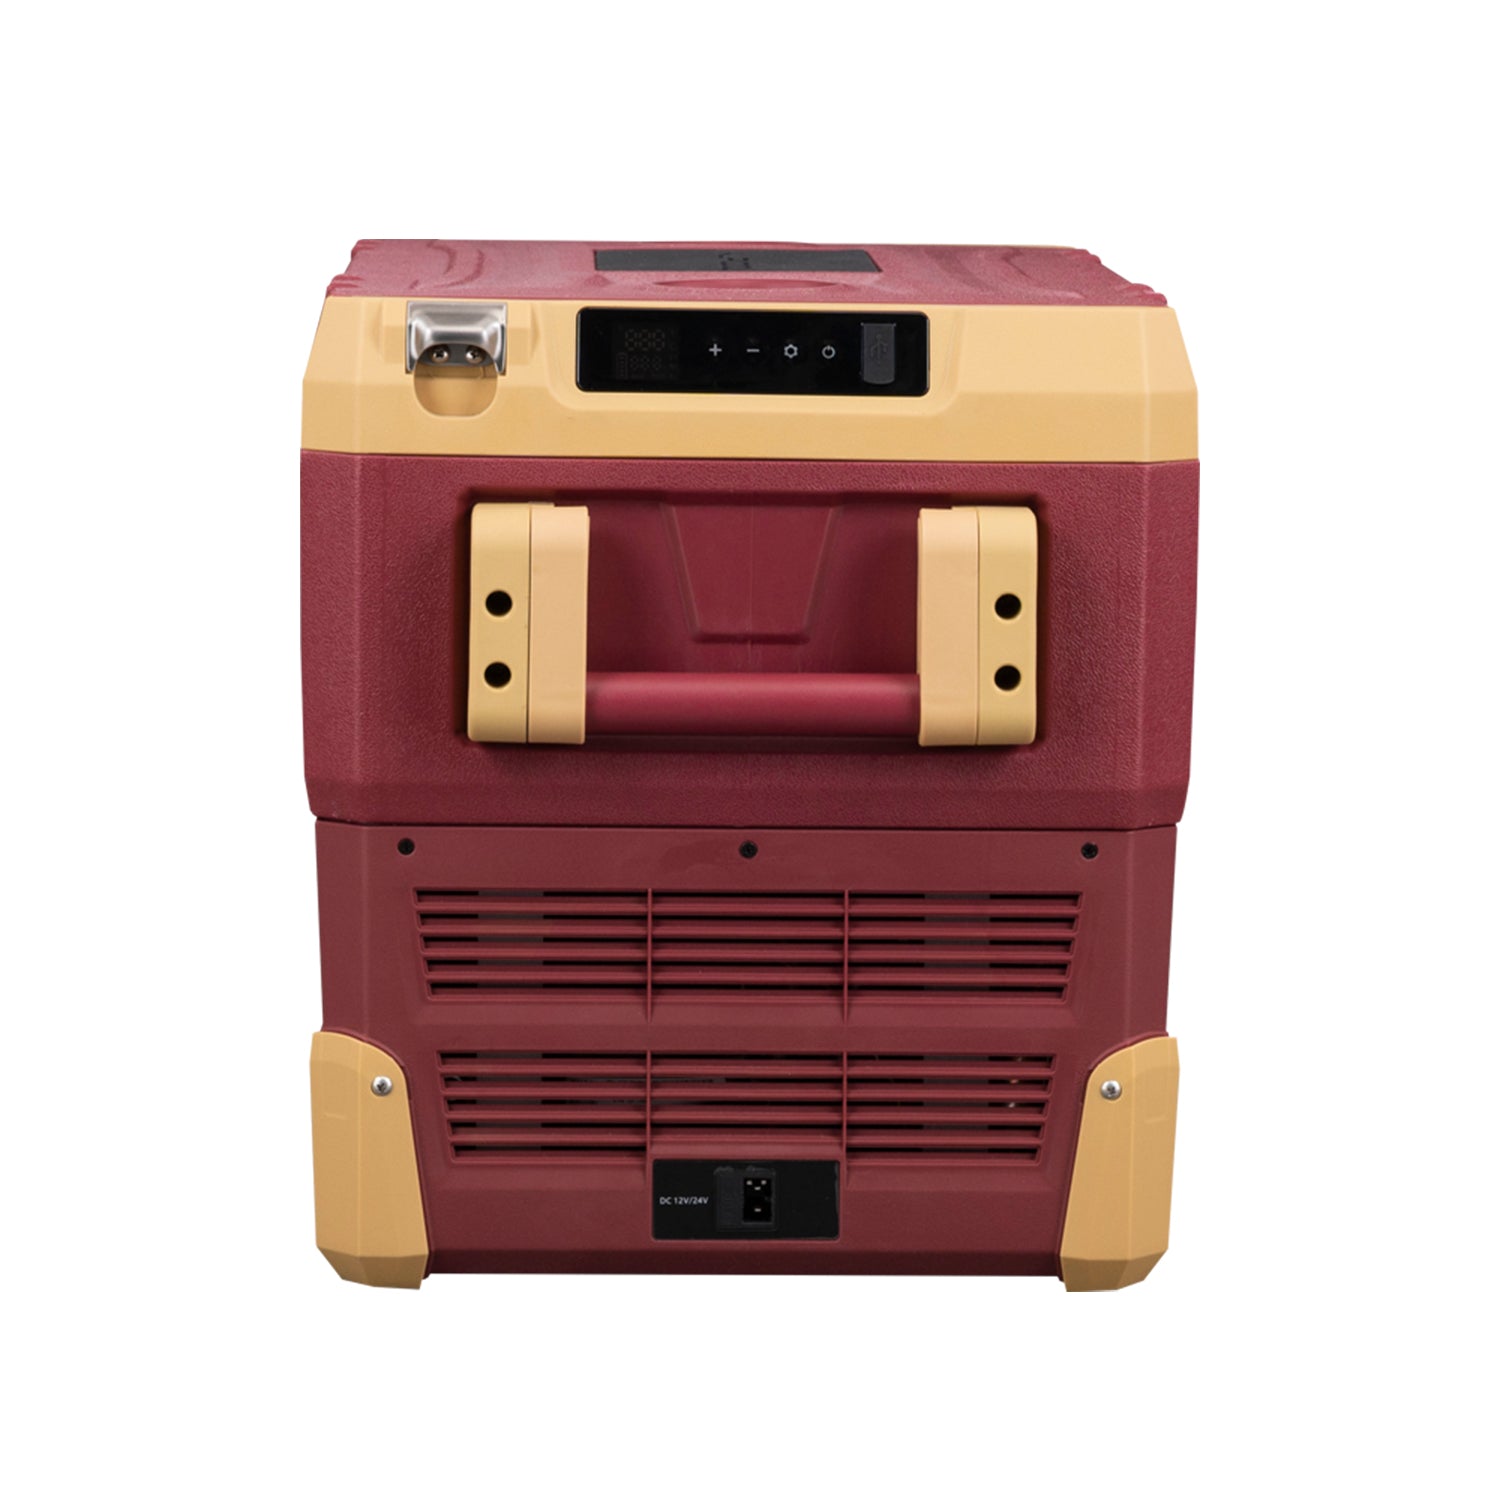 Alpicool IR42 40L Car Cooler - Fast Cooling, Bluetooth, Portable in Striking Iron Man Inspired Shades